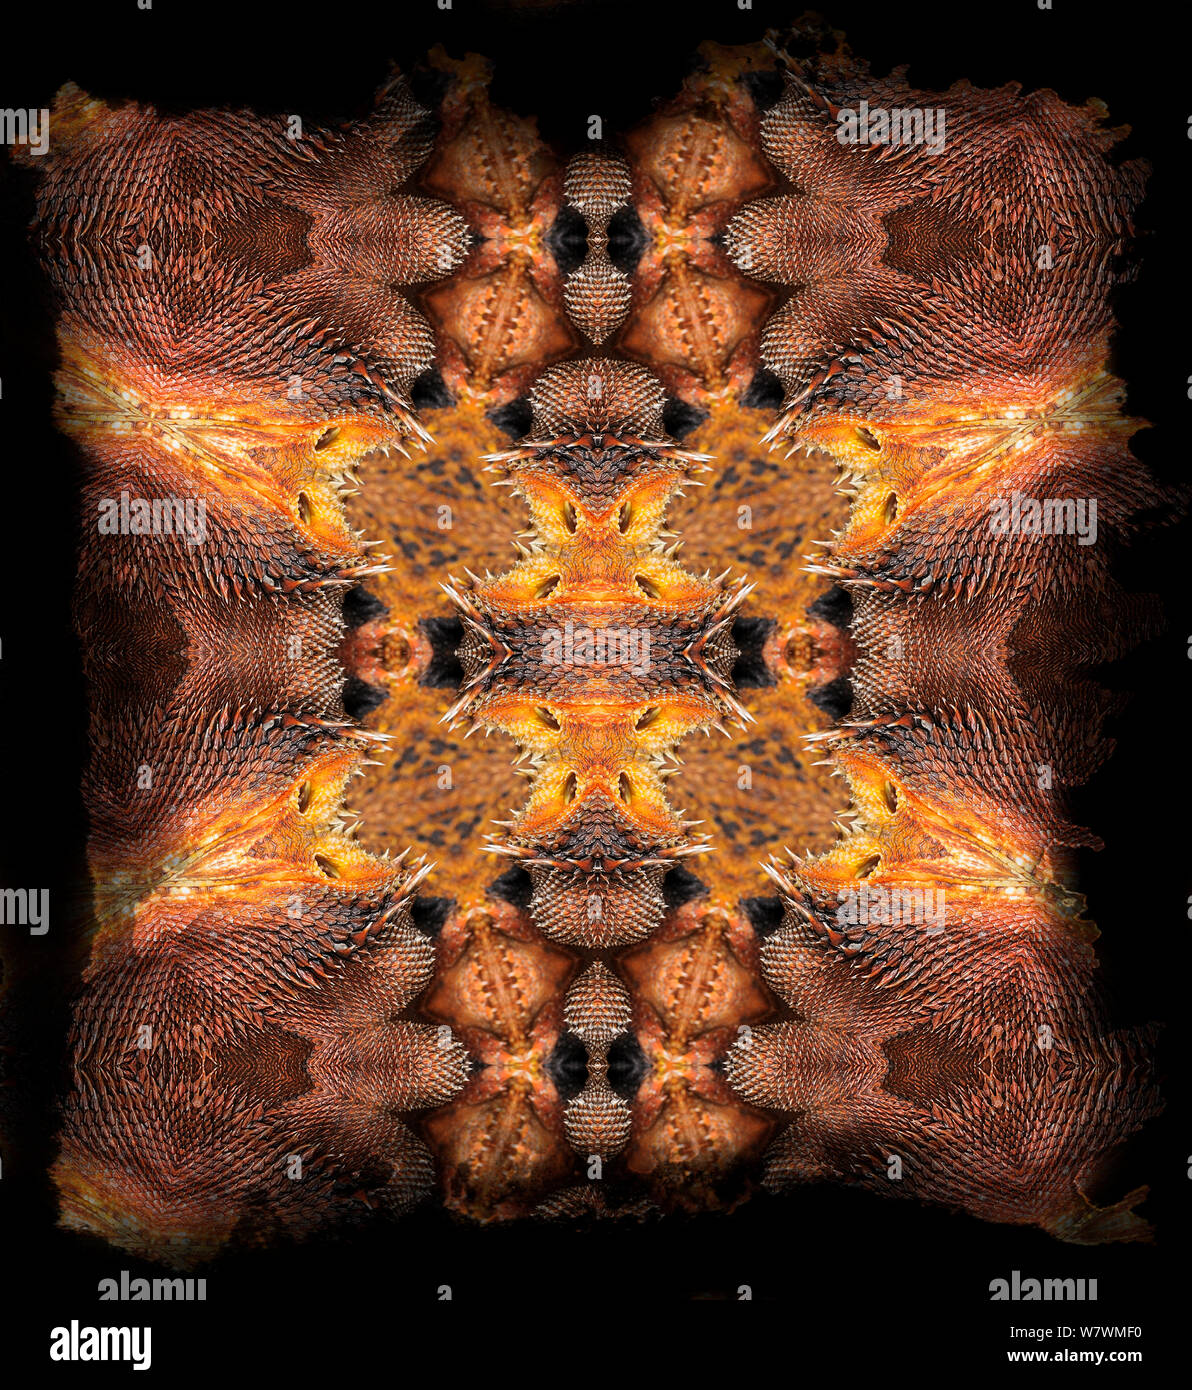 Kaleidoscope pattern formed from picture of Bearded Dragon (Pogona) scales, including scales from around ears. EMBARGOED FOR NAT GEO UNTIL the end of 2015 Stock Photo